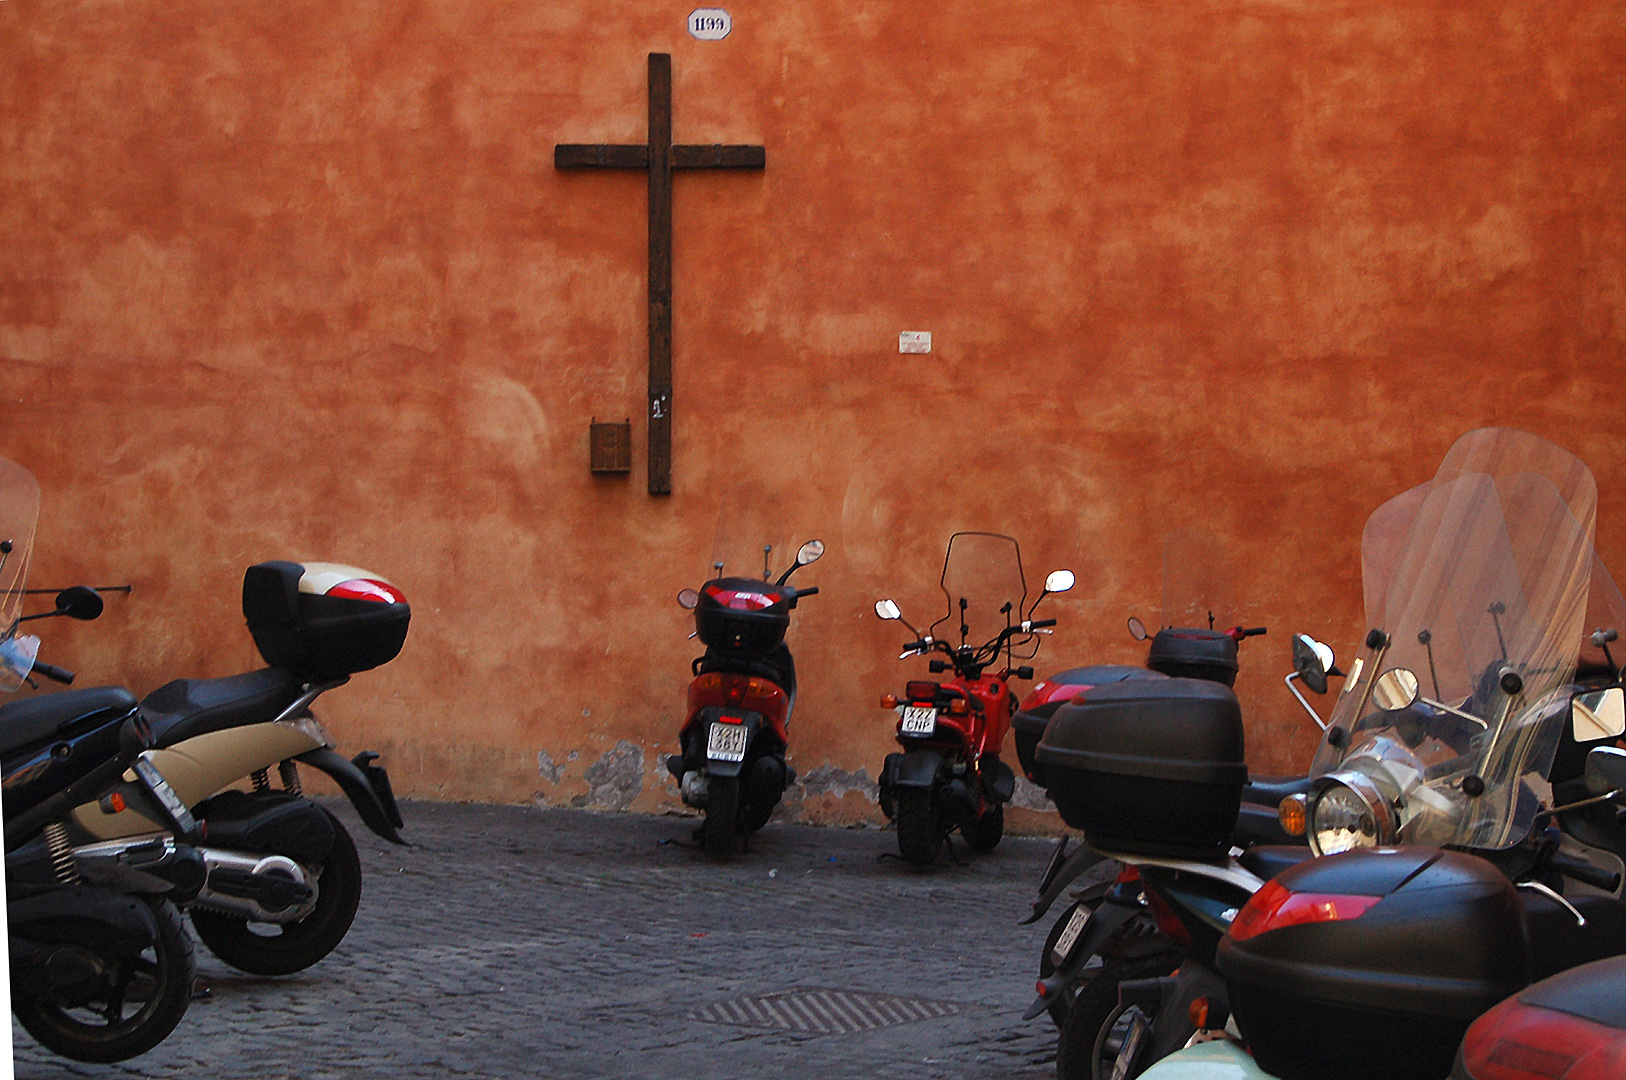 Scooters (Rome, Italië), Motorcycles (Italy, Latium, Rome)